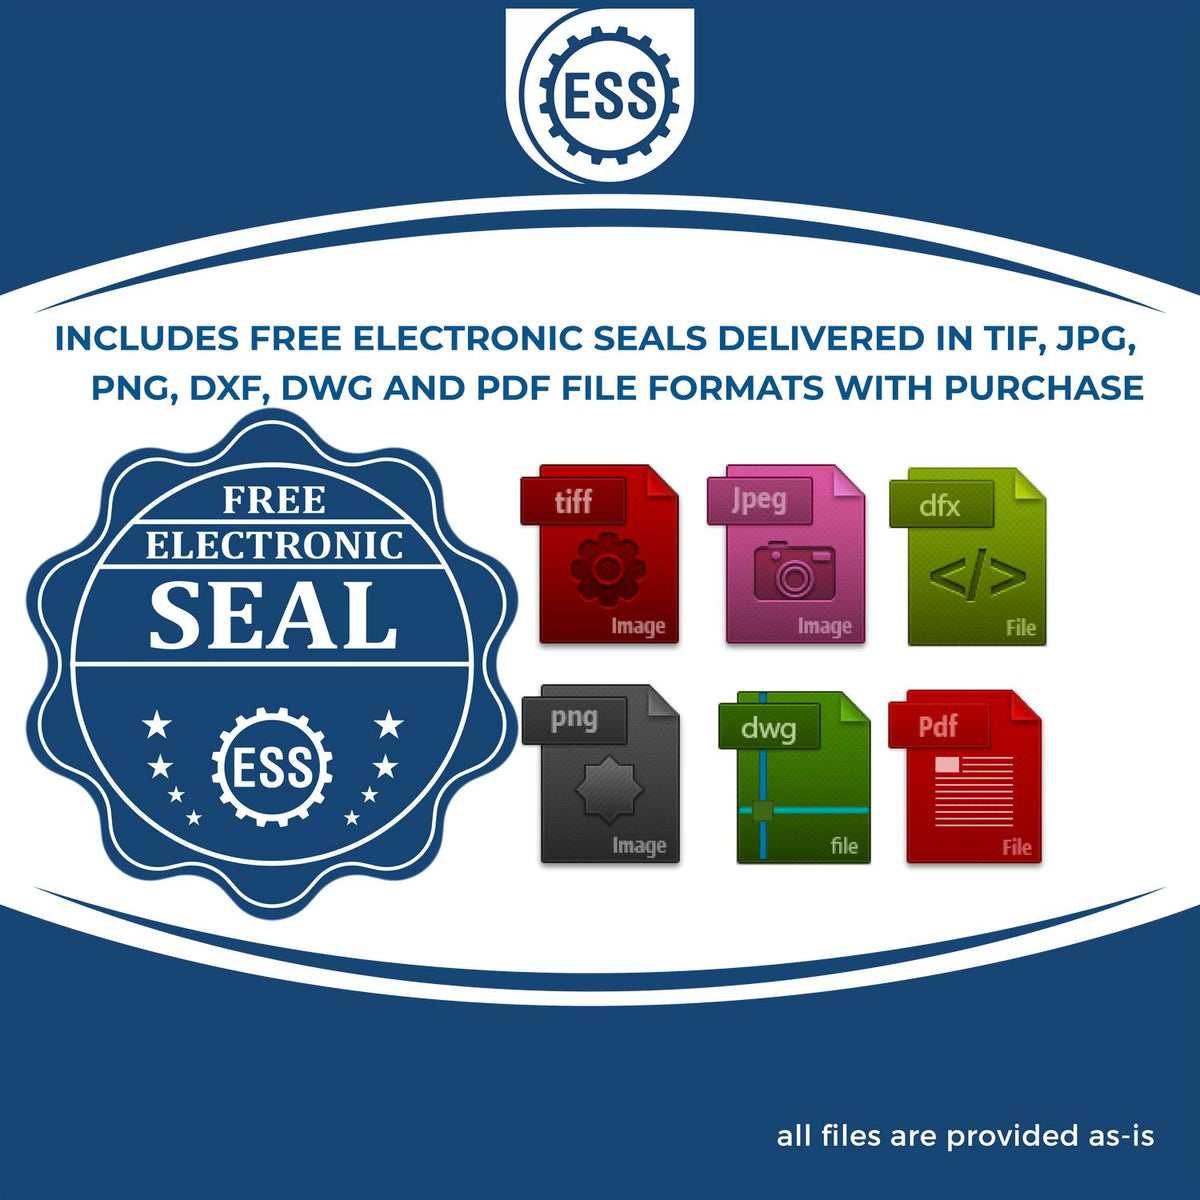 An infographic for the free electronic seal for the Hybrid Delaware Geologist Seal illustrating the different file type icons such as DXF, DWG, TIF, JPG and PNG.